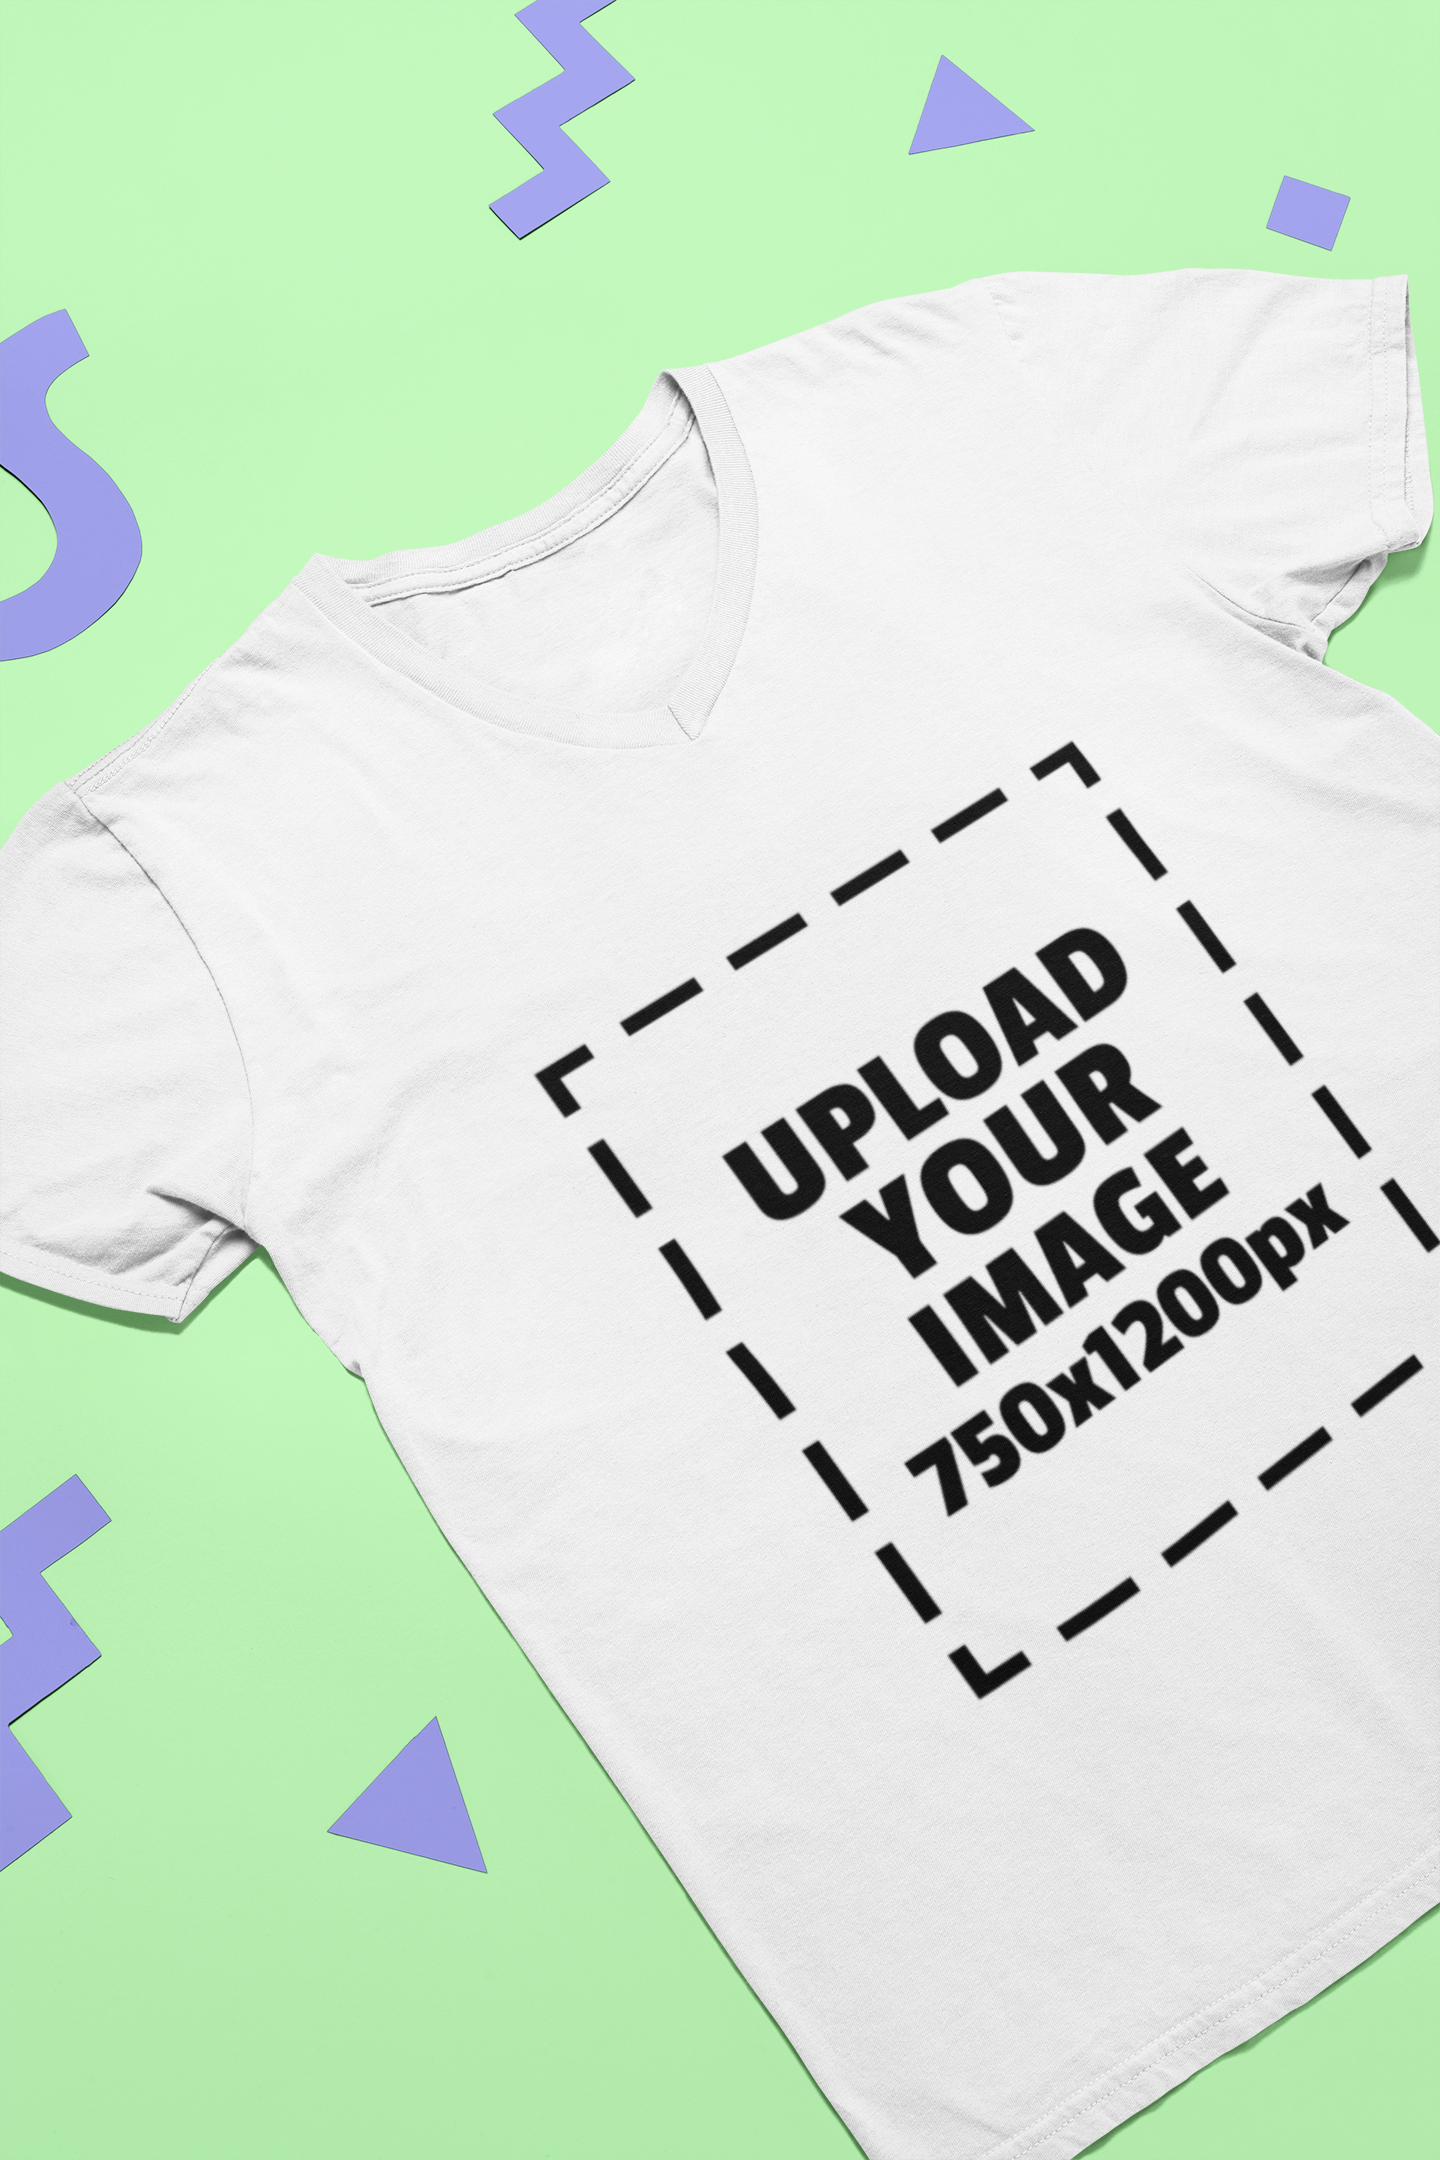 Download Mockup Of A T Shirt Lying Flat Over Cut Out Shapes By Placeit Free Mockup